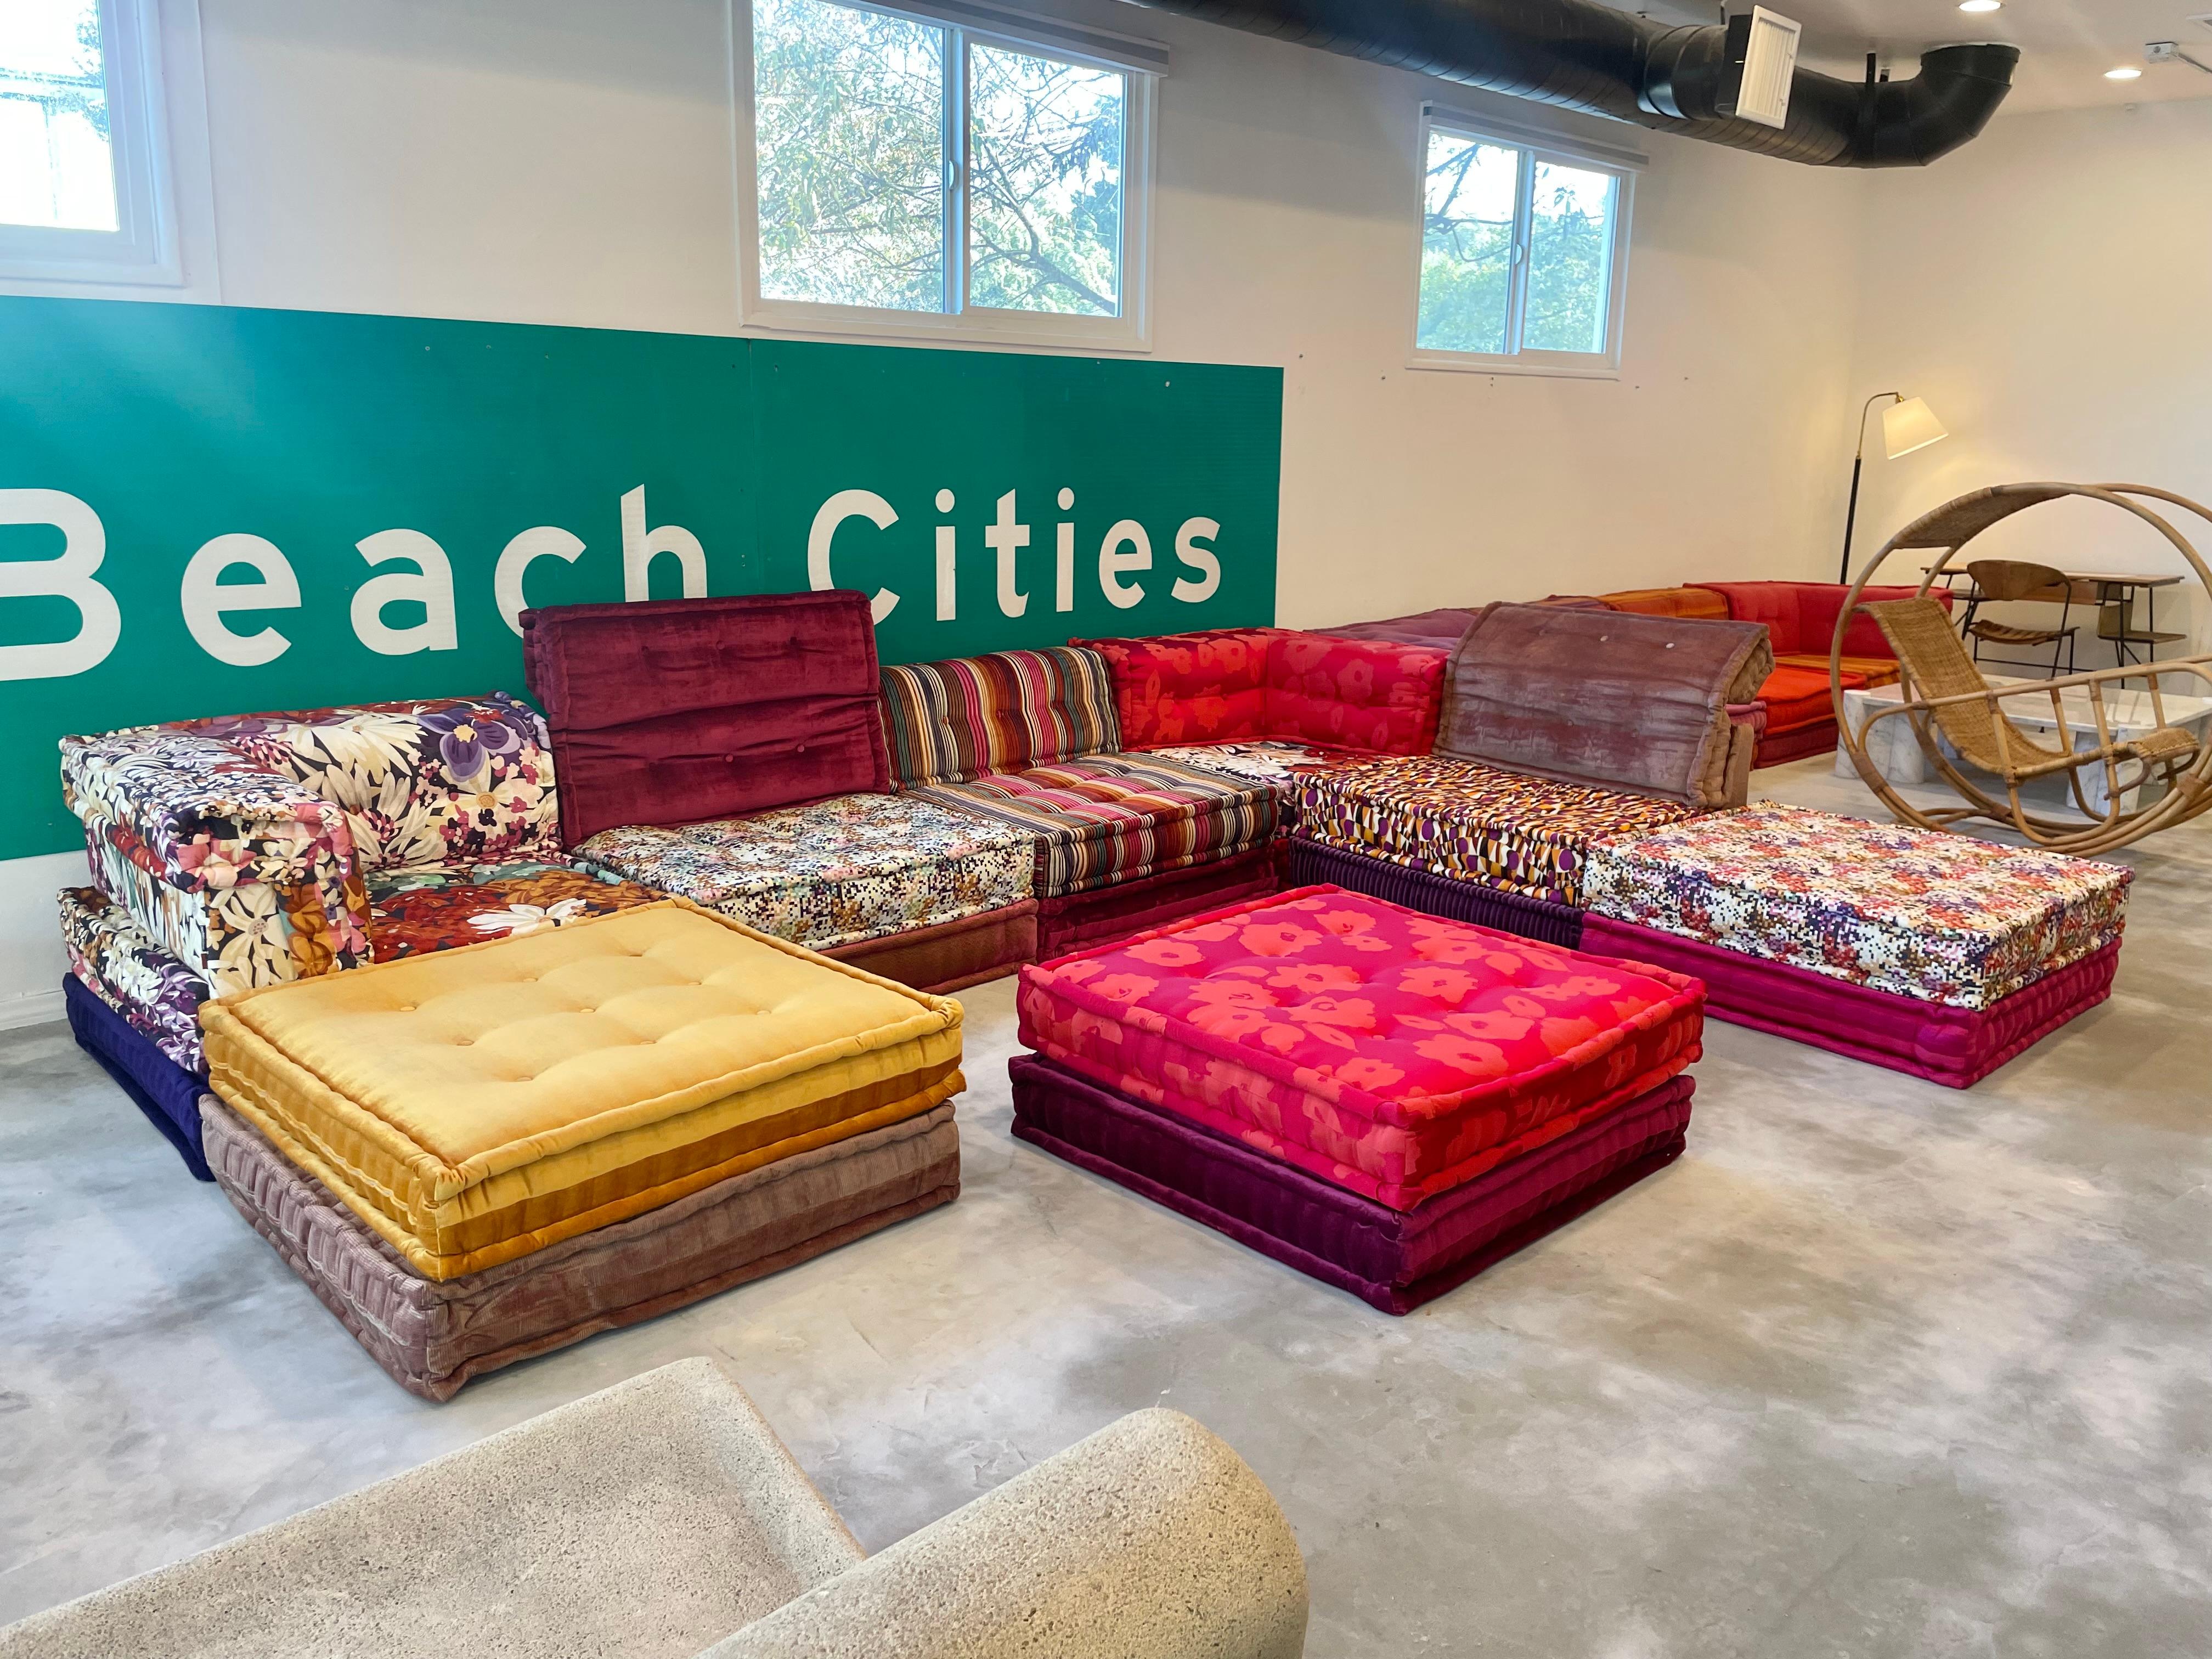 Beautiful Mah Jong sofa designed by Hans Hopfer for Roche Bobois. An iconic sofa design made in Italy and fully upholstered in stunning original Missoni fabric. Not a single stain or tear or snag on the fabric. A perfect specimen of this sofa. A